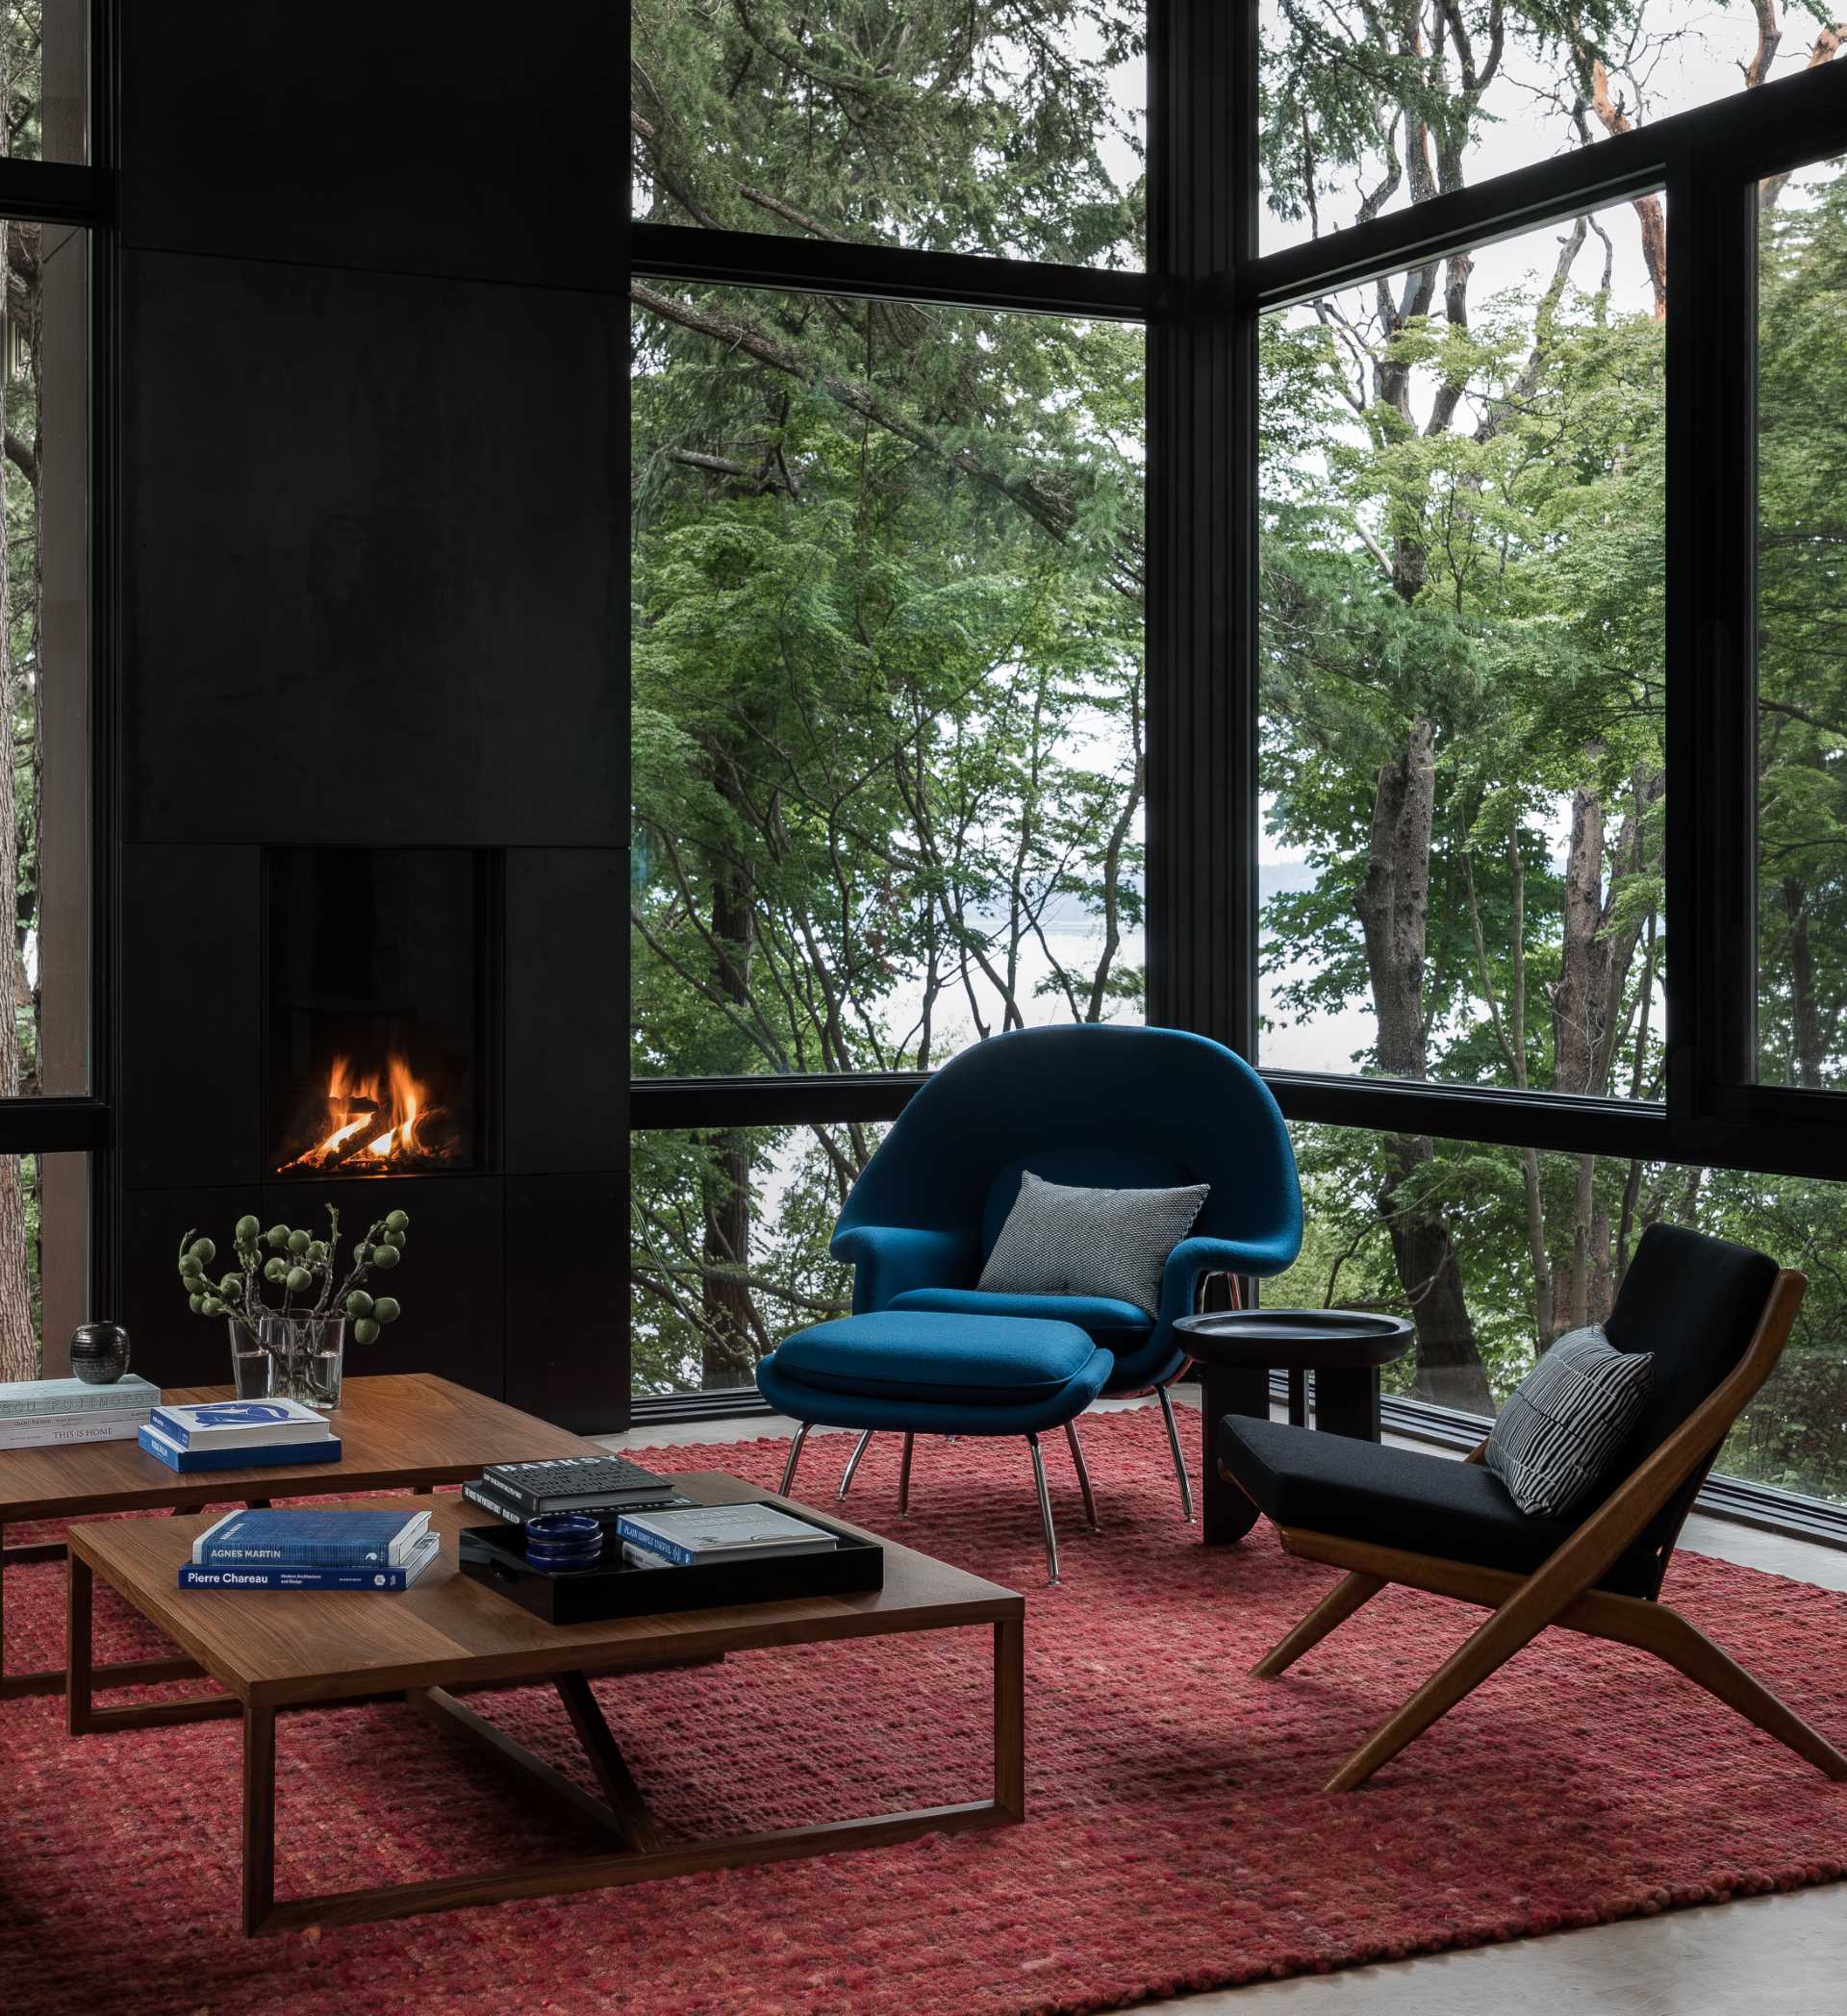 This modern living room, which is surrounded by trees on three sides, includes thick black window frames and a fireplace, while a bold reg rug and blue chair add a bold splash of color to the space.